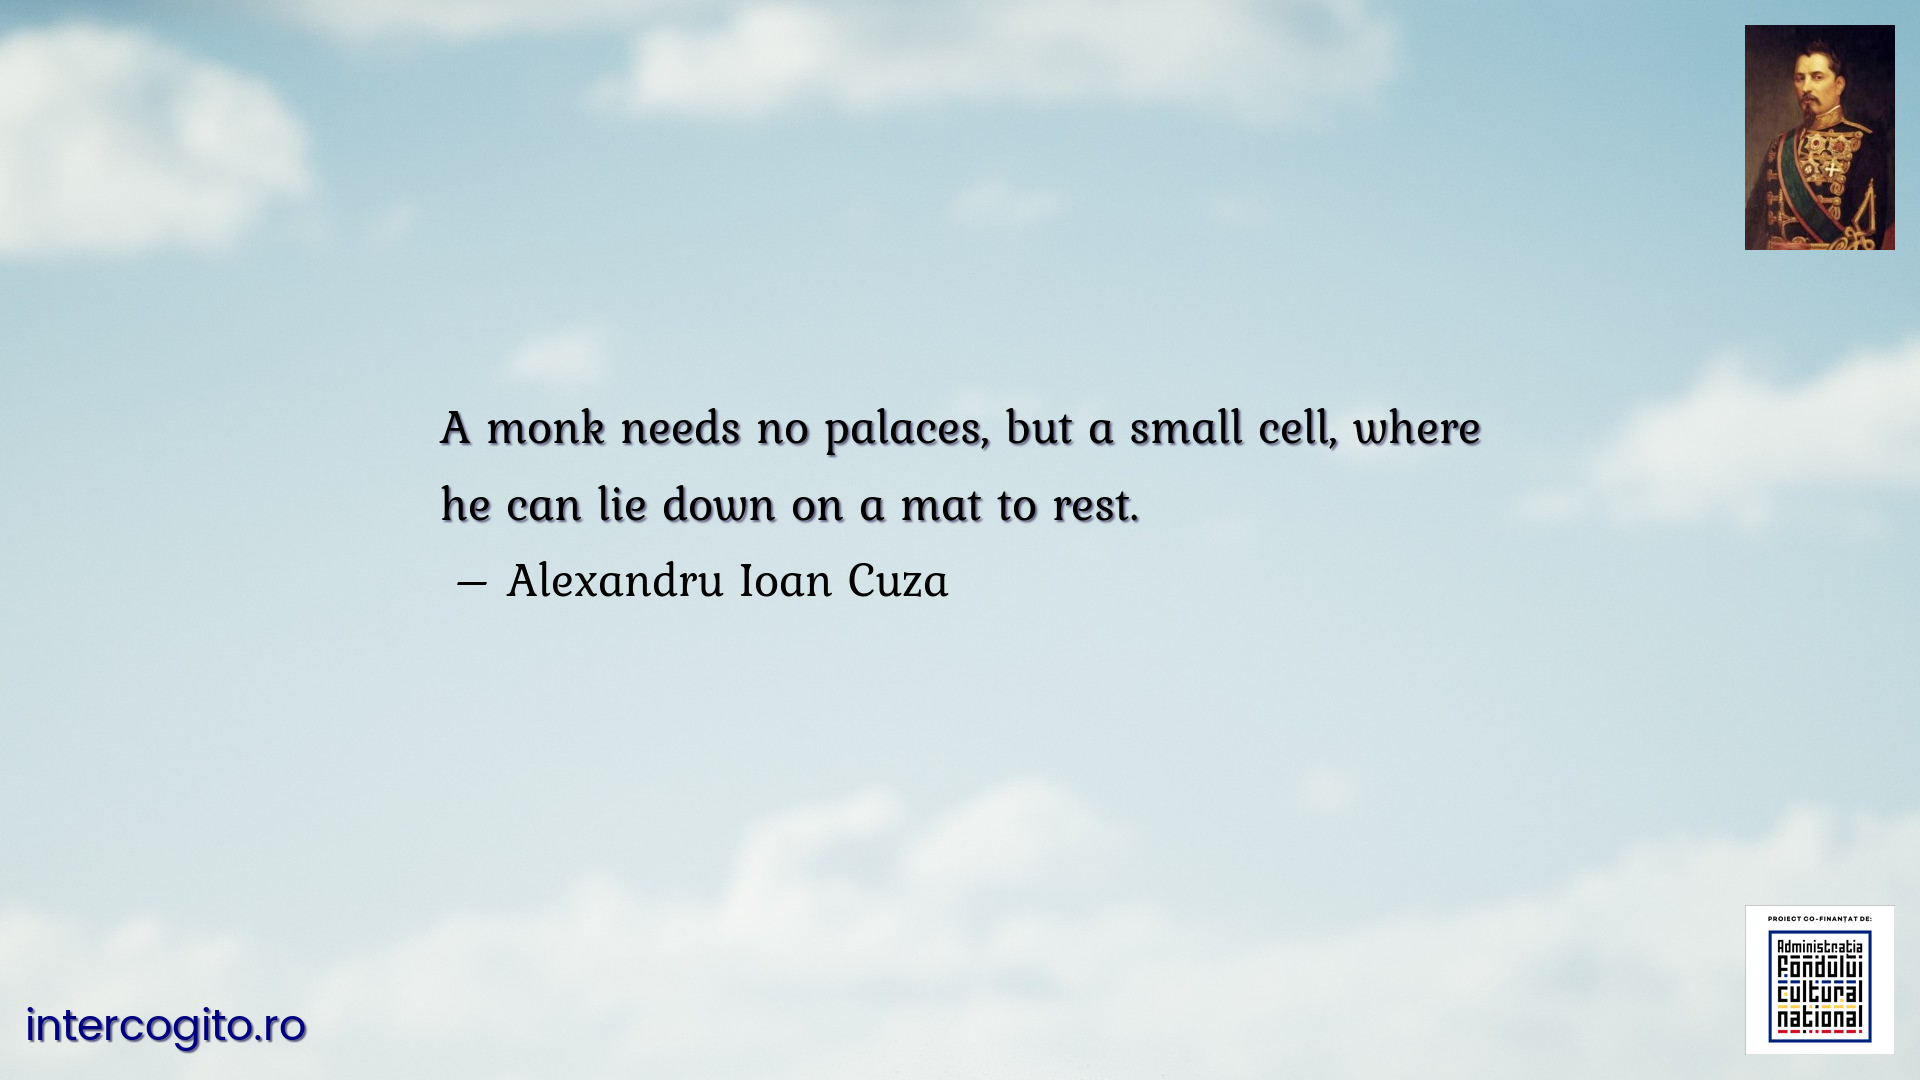 A monk needs no palaces, but a small cell, where he can lie down on a mat to rest.